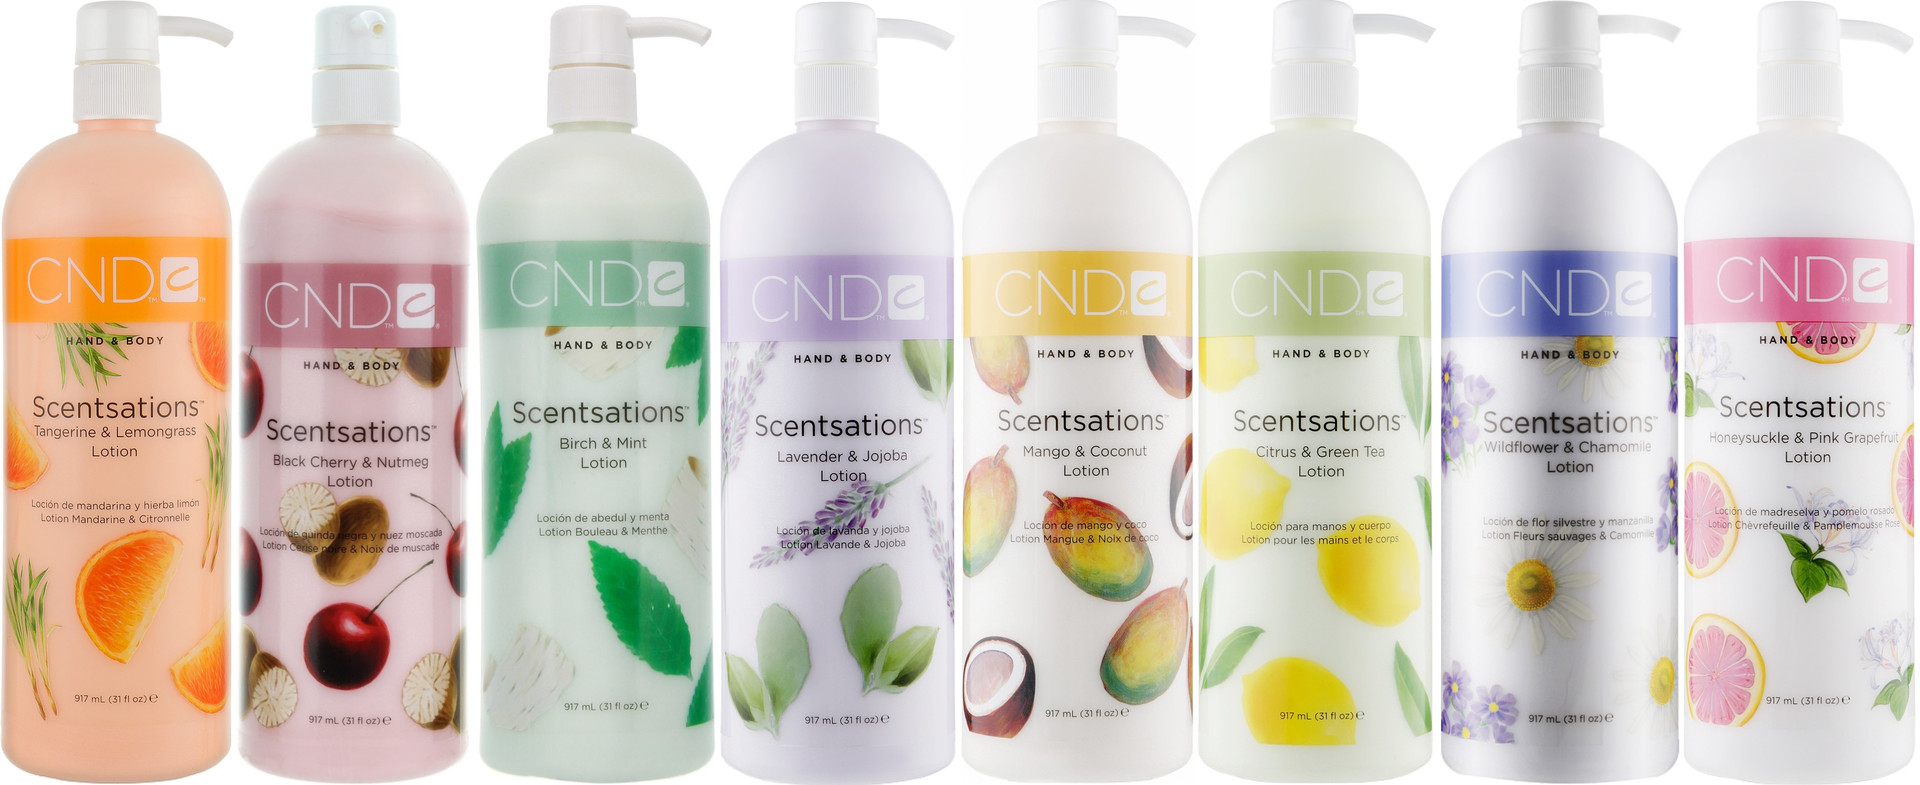 Creative Nail Design Scentsations Hand & Body Lotion, Cucumber & Aloe - wide 4